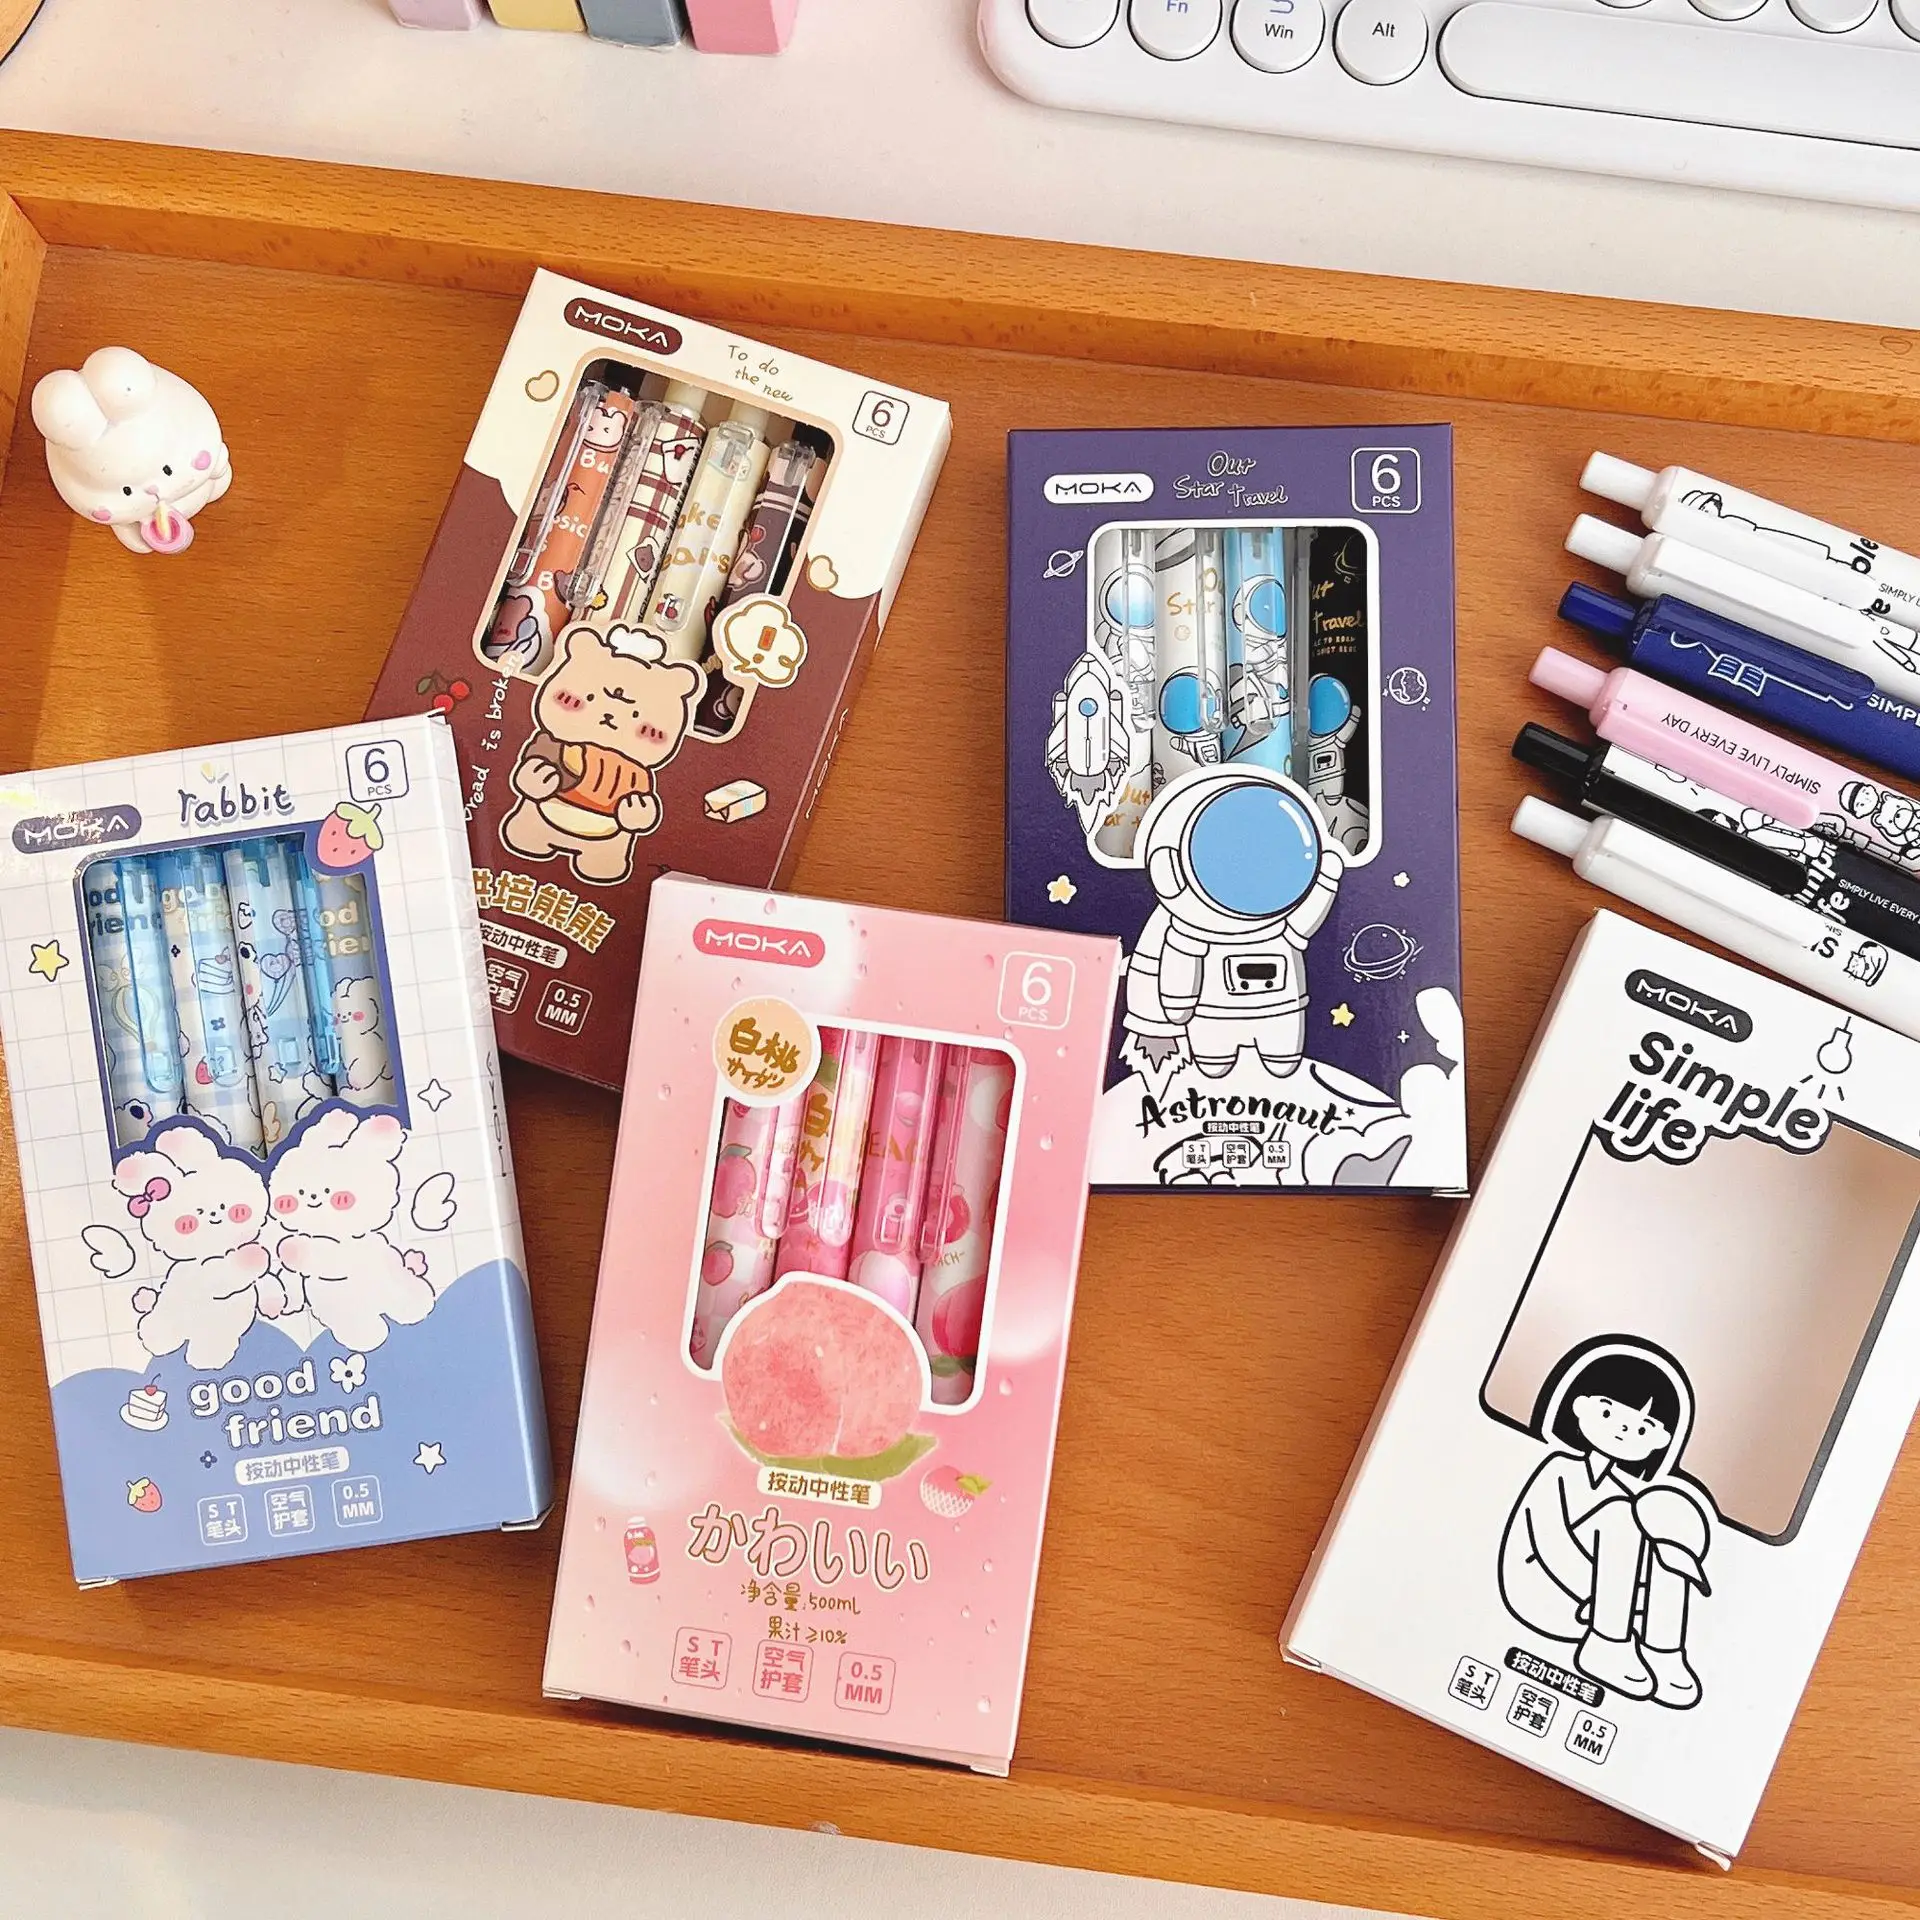 TULX 10COLERS school supplies cute stationery cute stationary supplies  kawaii stationery stationery items